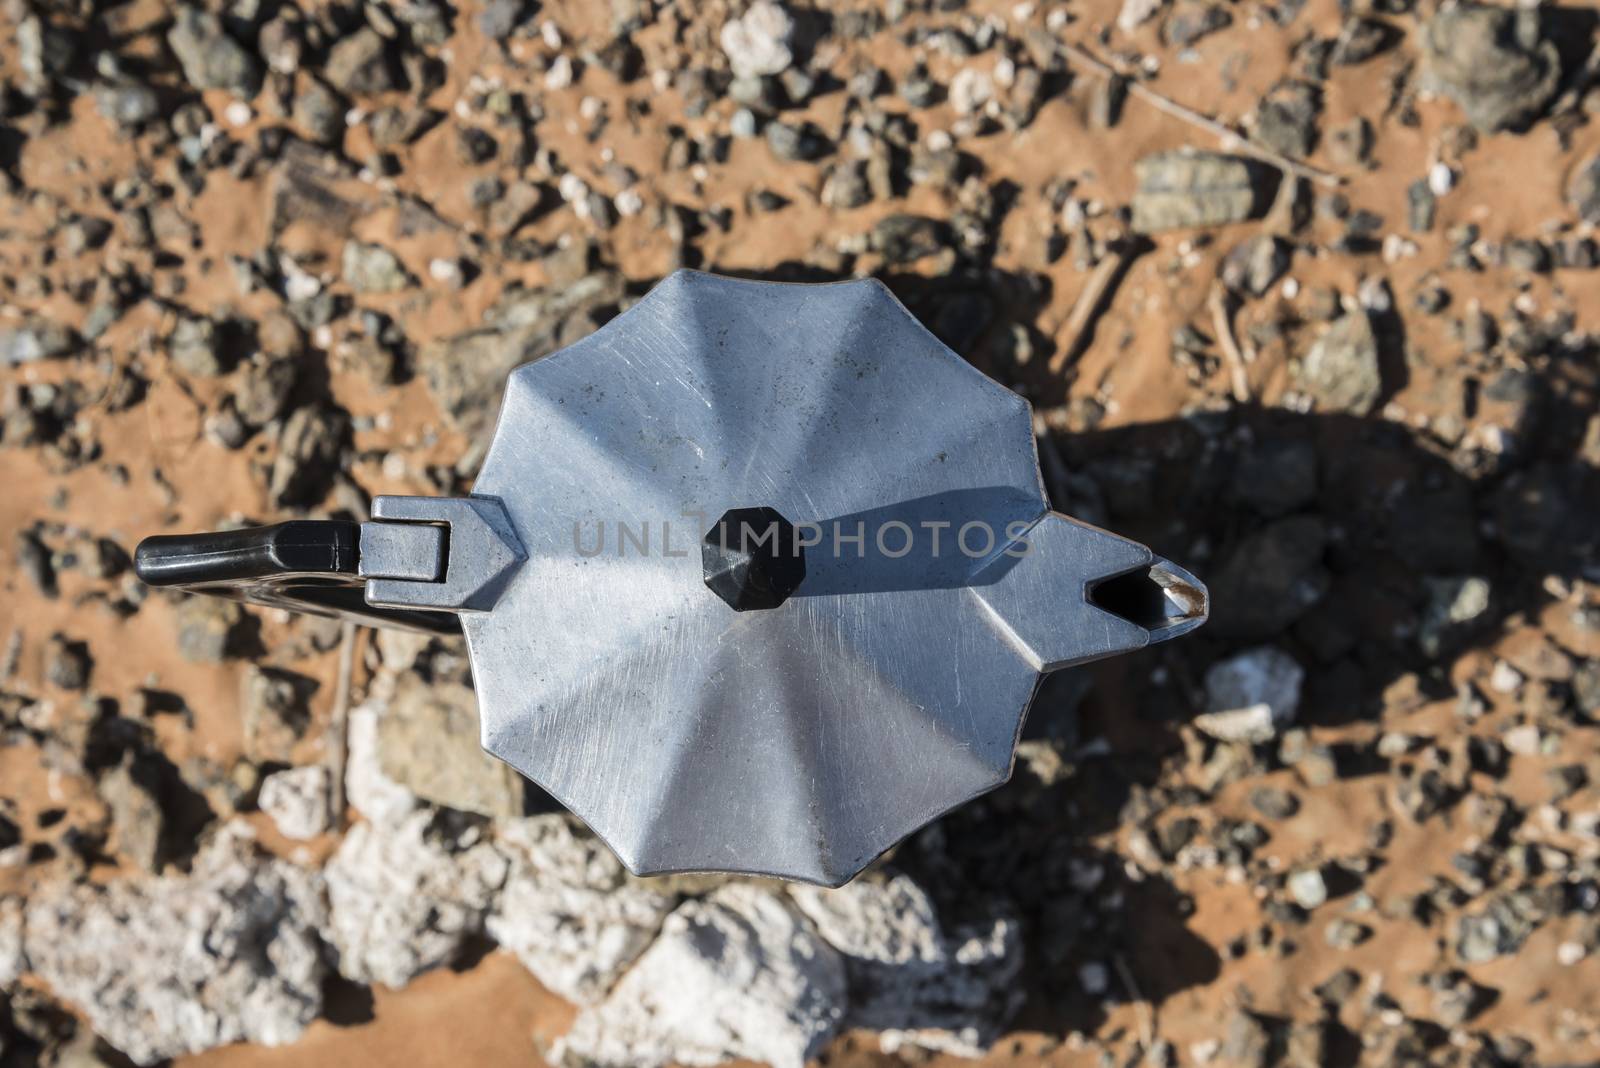 Top view of Italian Coffee maker at a fireplace in the desert, surrounded by sand and stones